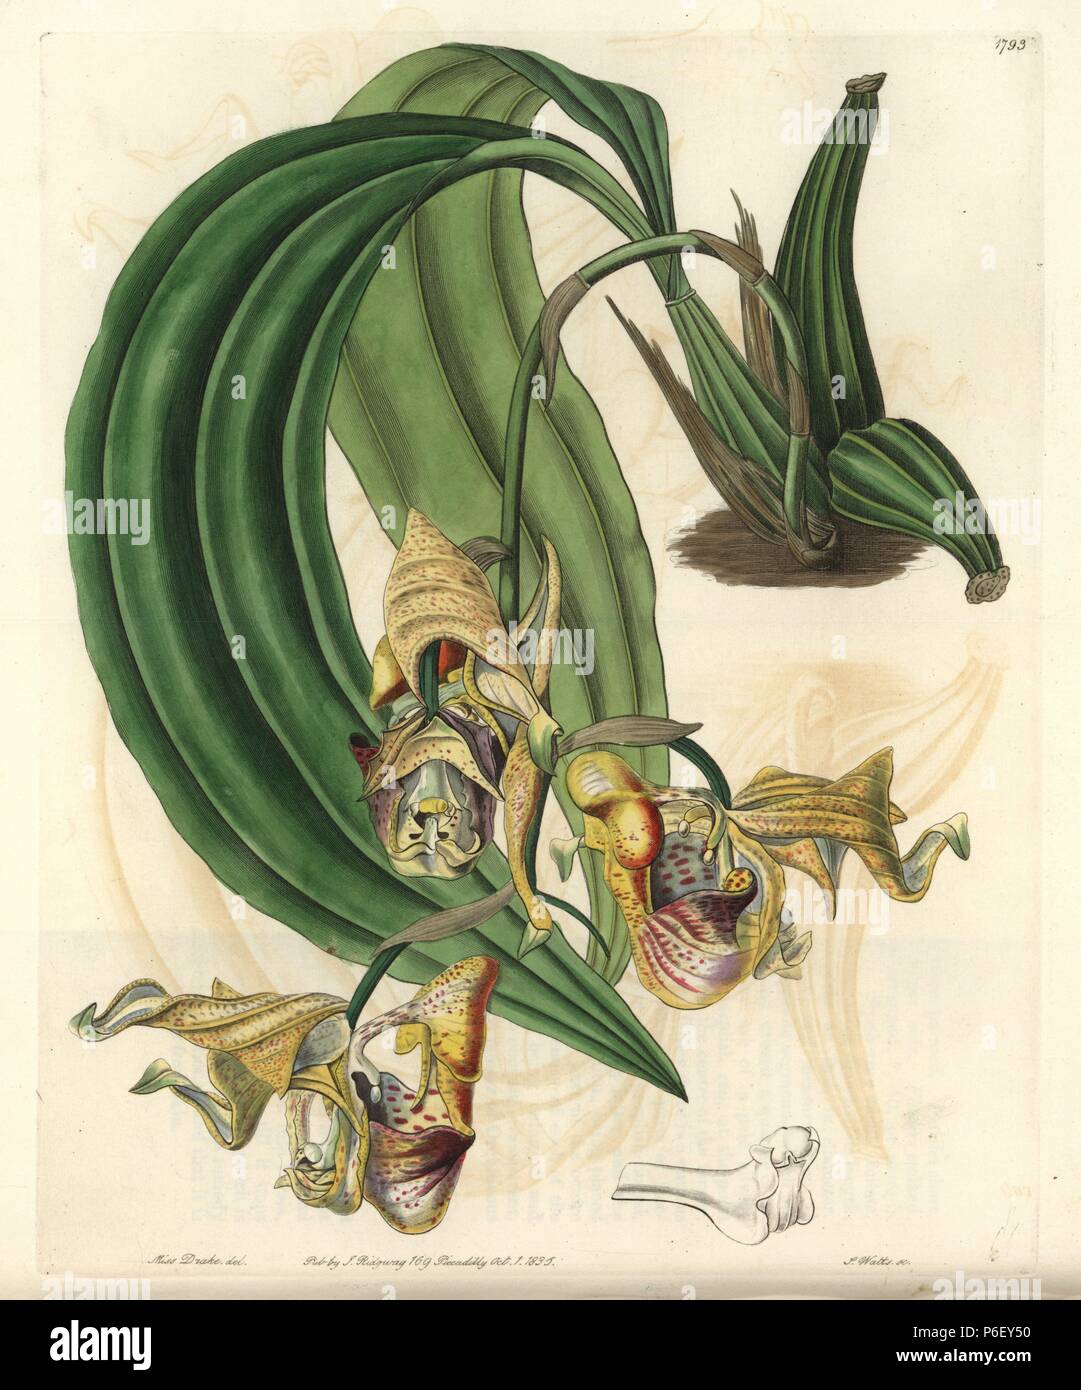 Spotted coryanthes orchid, Coryanthes maculata. Handcoloured copperplate engraving by S. Watts after an illustration by Miss Drake from Sydenham Edwards' 'The Botanical Register,' London, Ridgway, 1835. Sarah Anne Drake (1803-1857) drew over 1,300 plates for the botanist John Lindley, including many orchids. Stock Photo